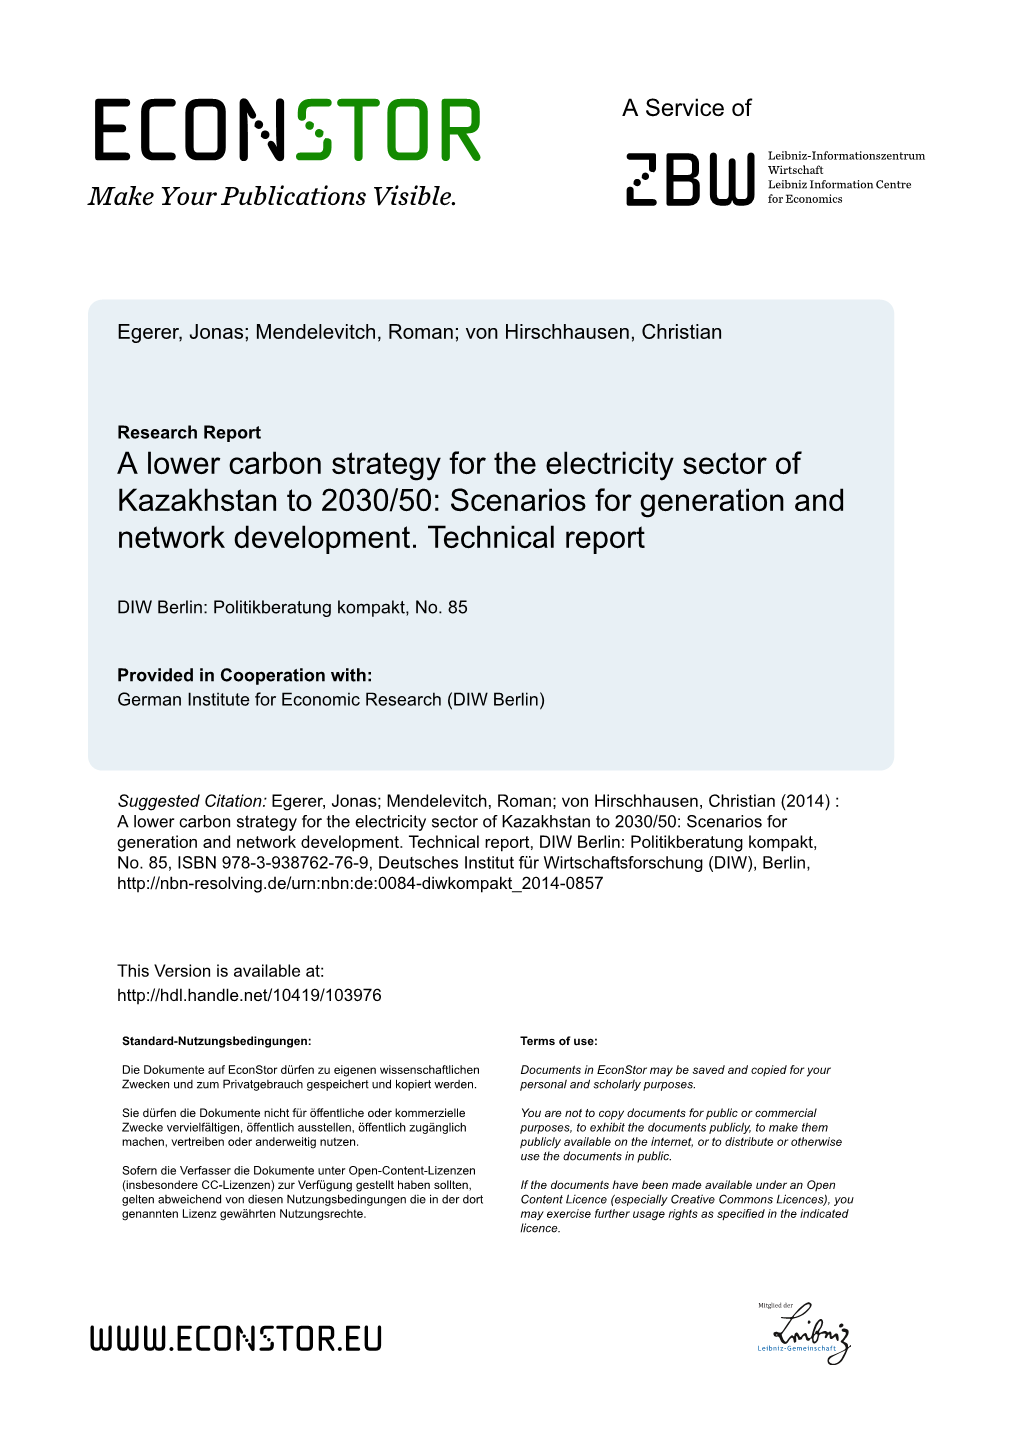 A Lower Carbon Strategy for the Electricity Sector of Kazakhstan to 2030/50: Scenarios for Generation and Network Development